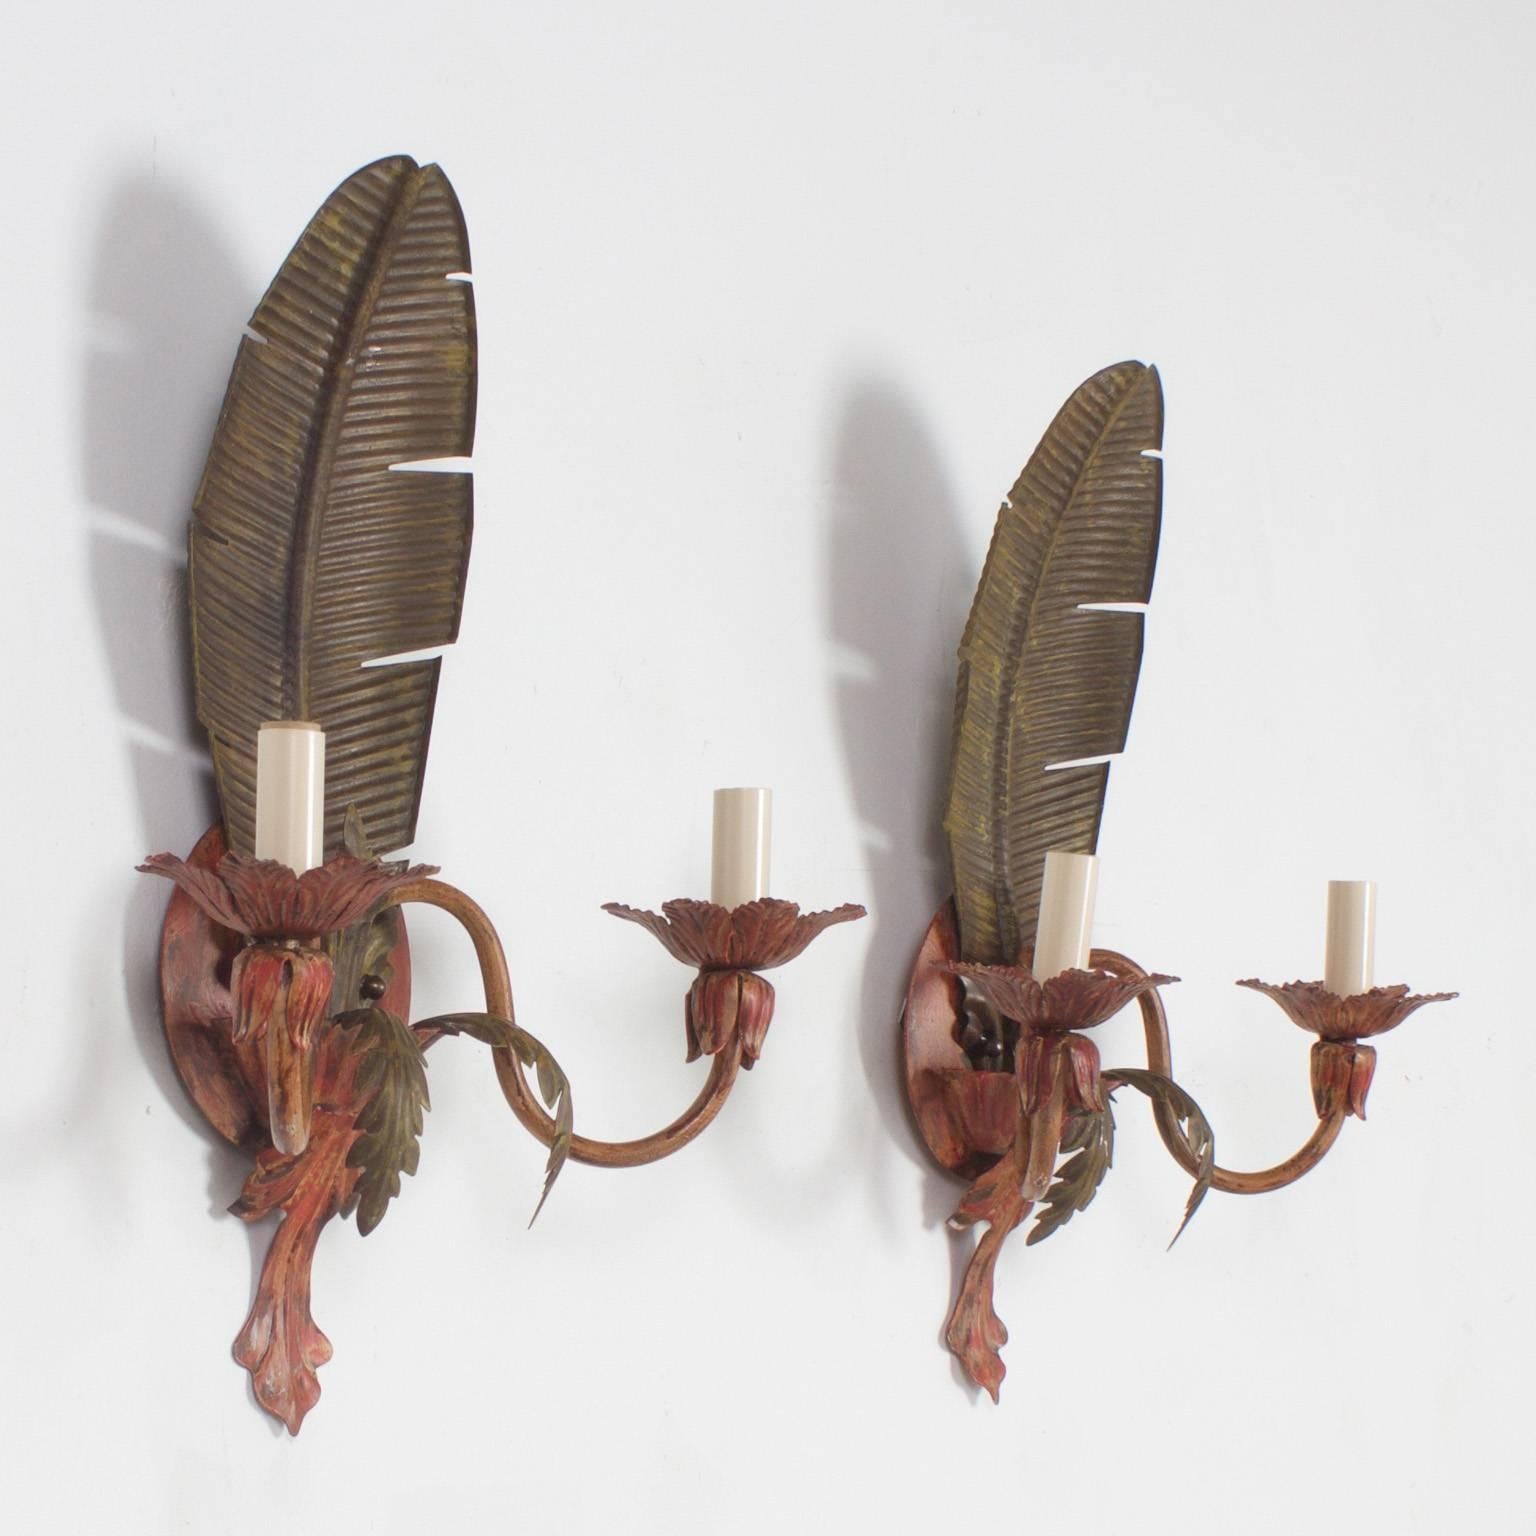 Whimsical pair of Mid-Century tole palm leaf sconces with a delightful tropical flavor and painted with muted hues. Designed with a classical two light form and acanthus details.

.